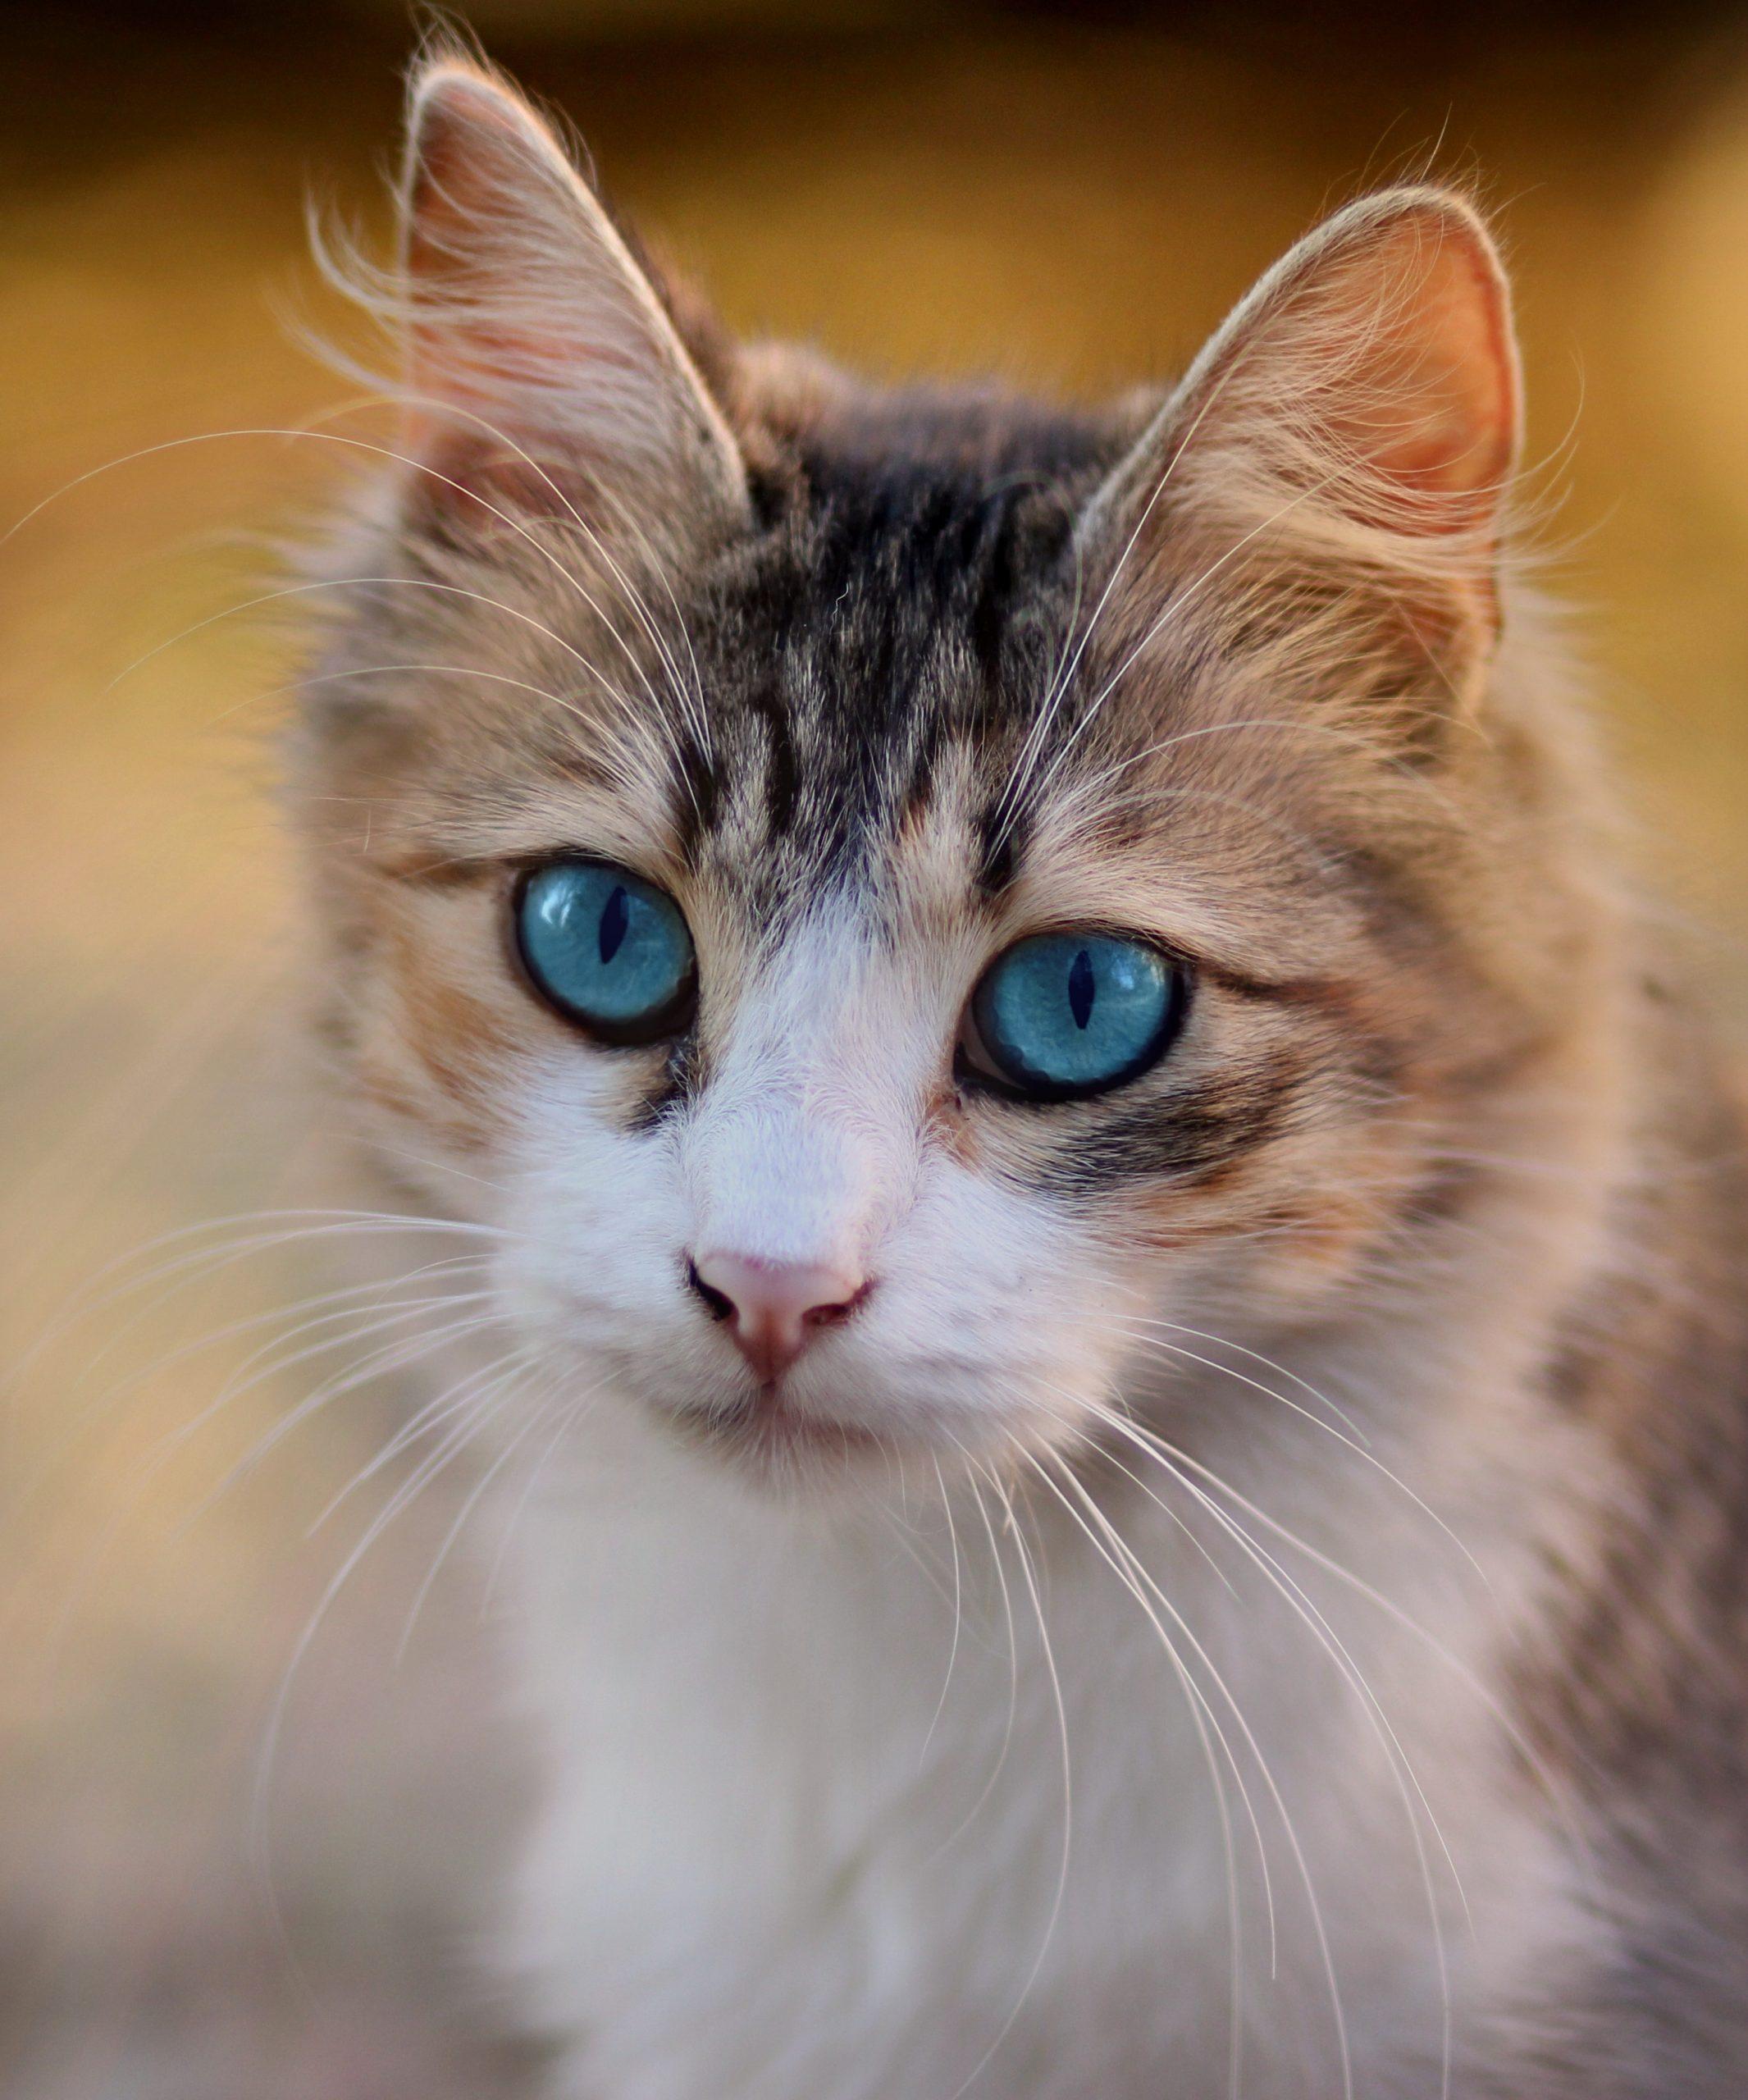 Tabby cat with blue eyes 3336579 scaled